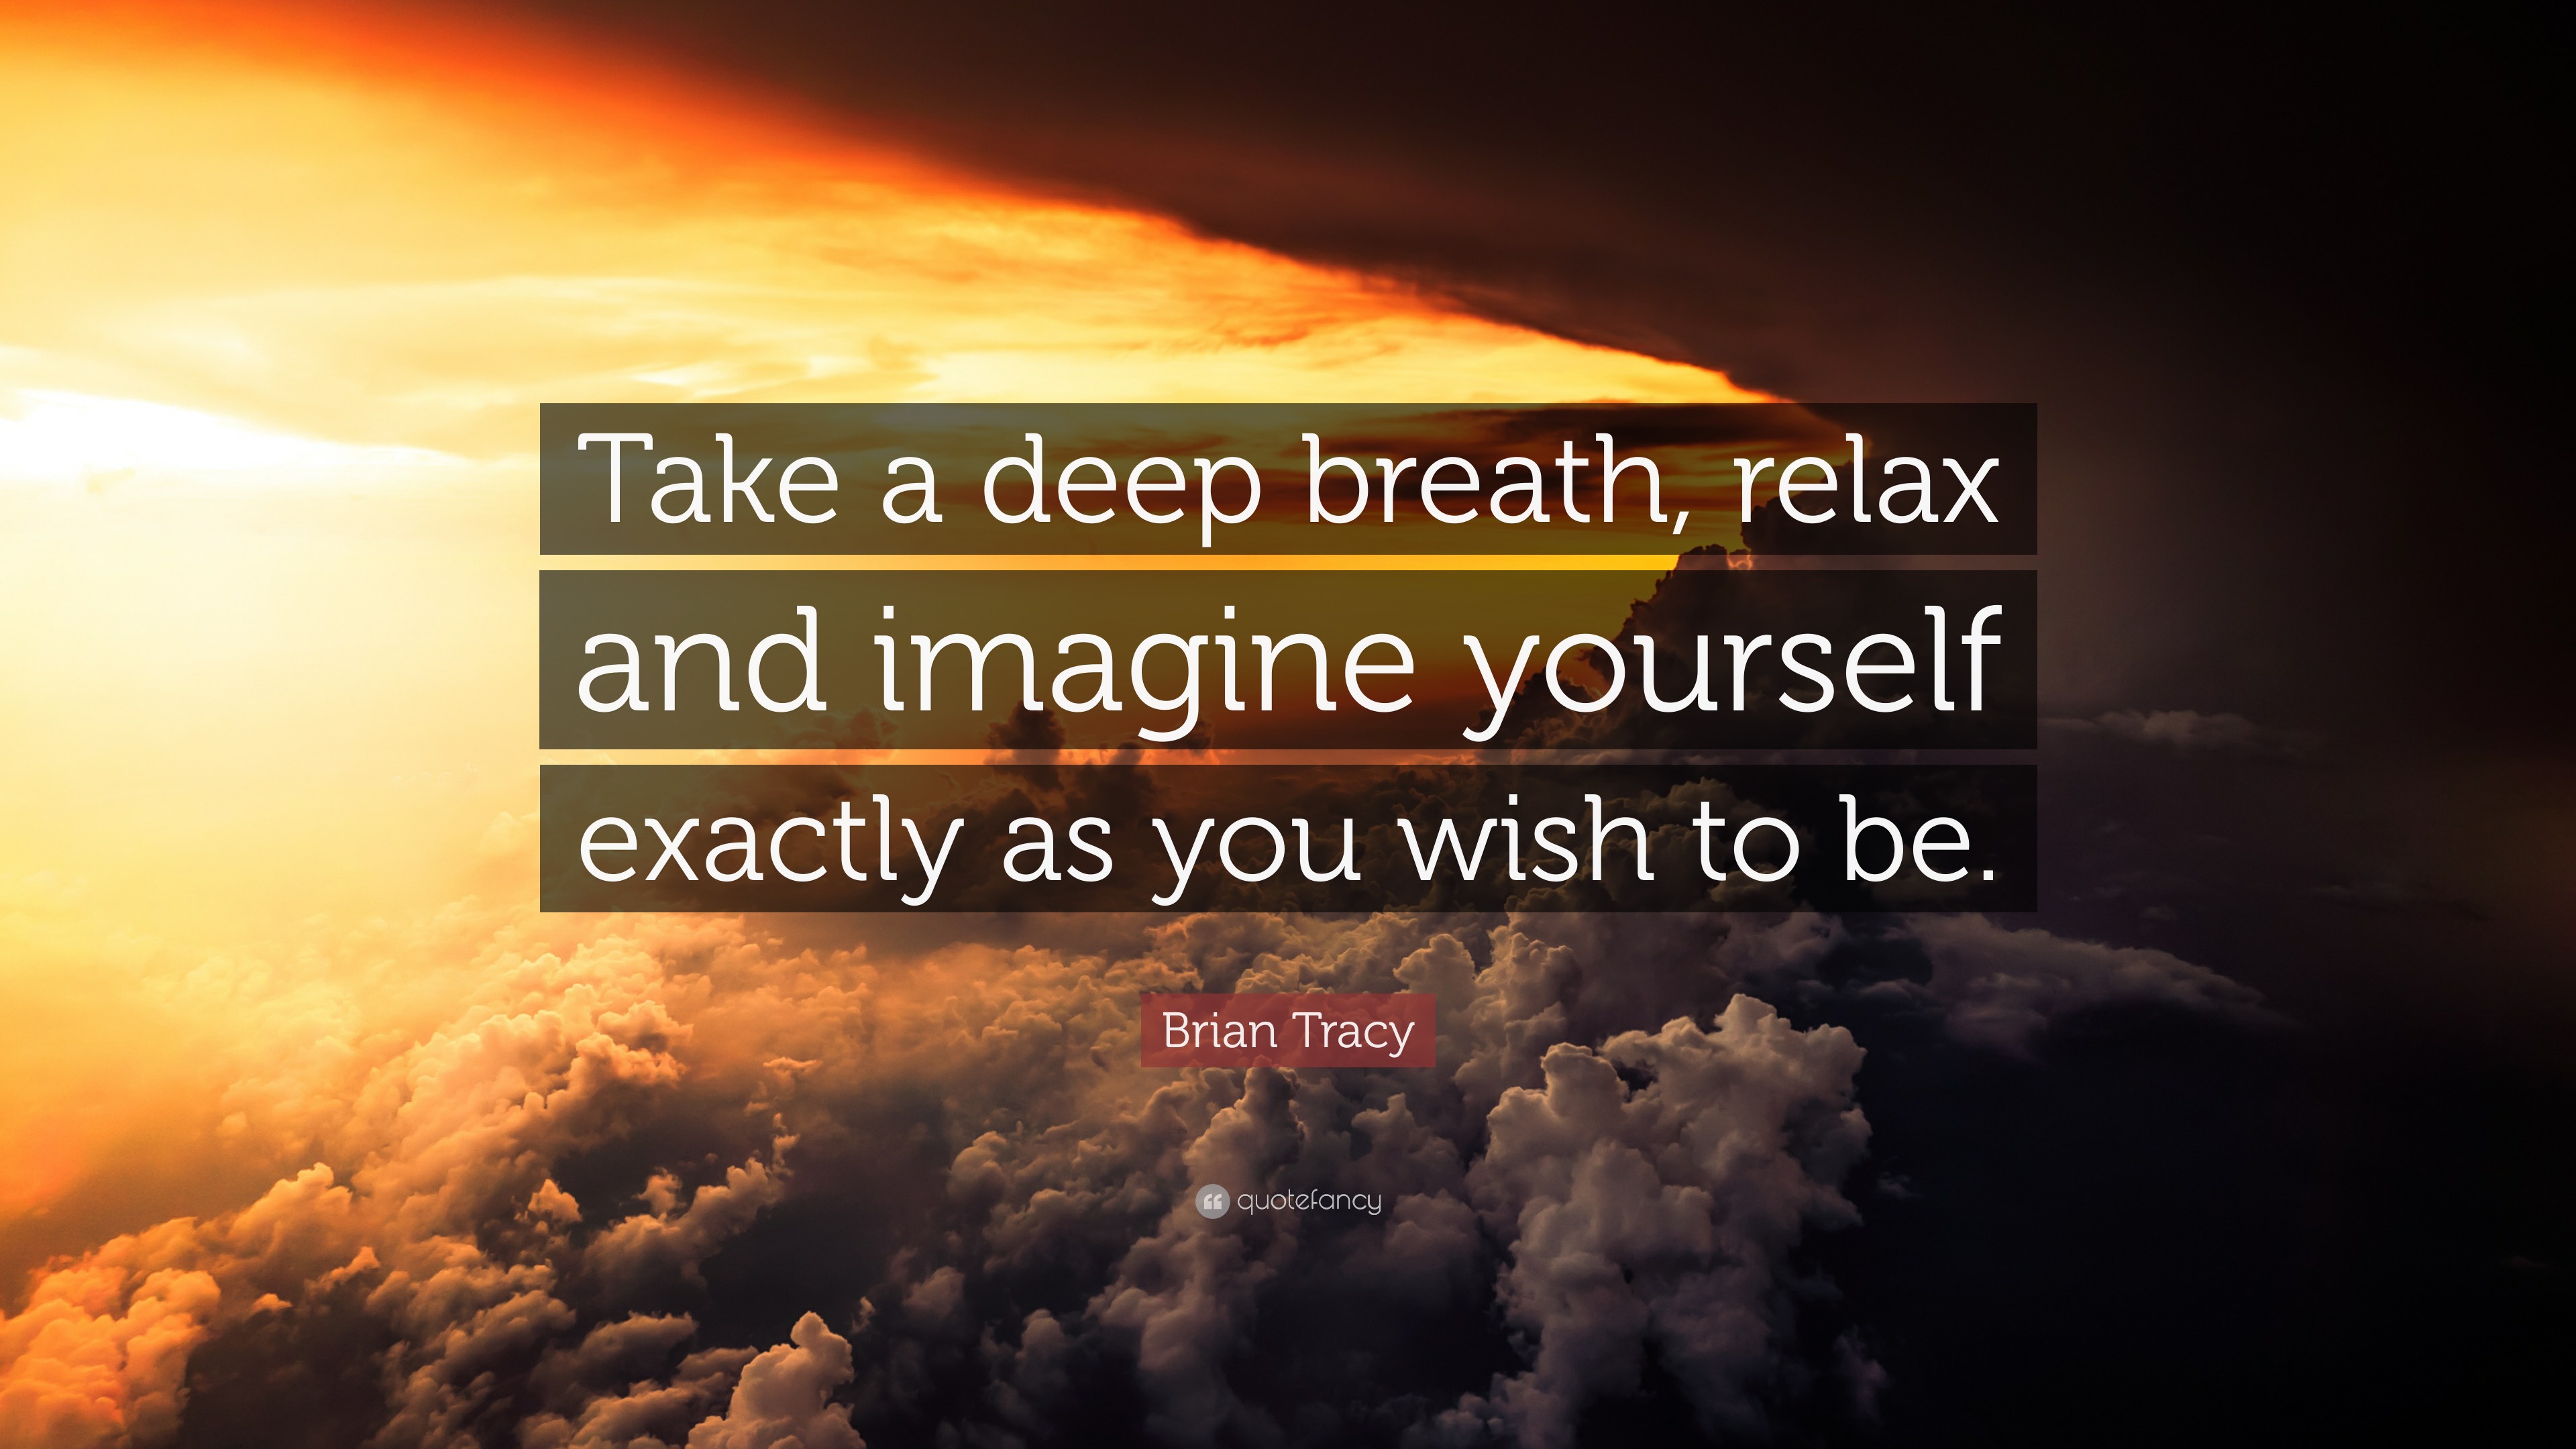 Brian Tracy Quote  Take a deep  breath  relax and imagine 